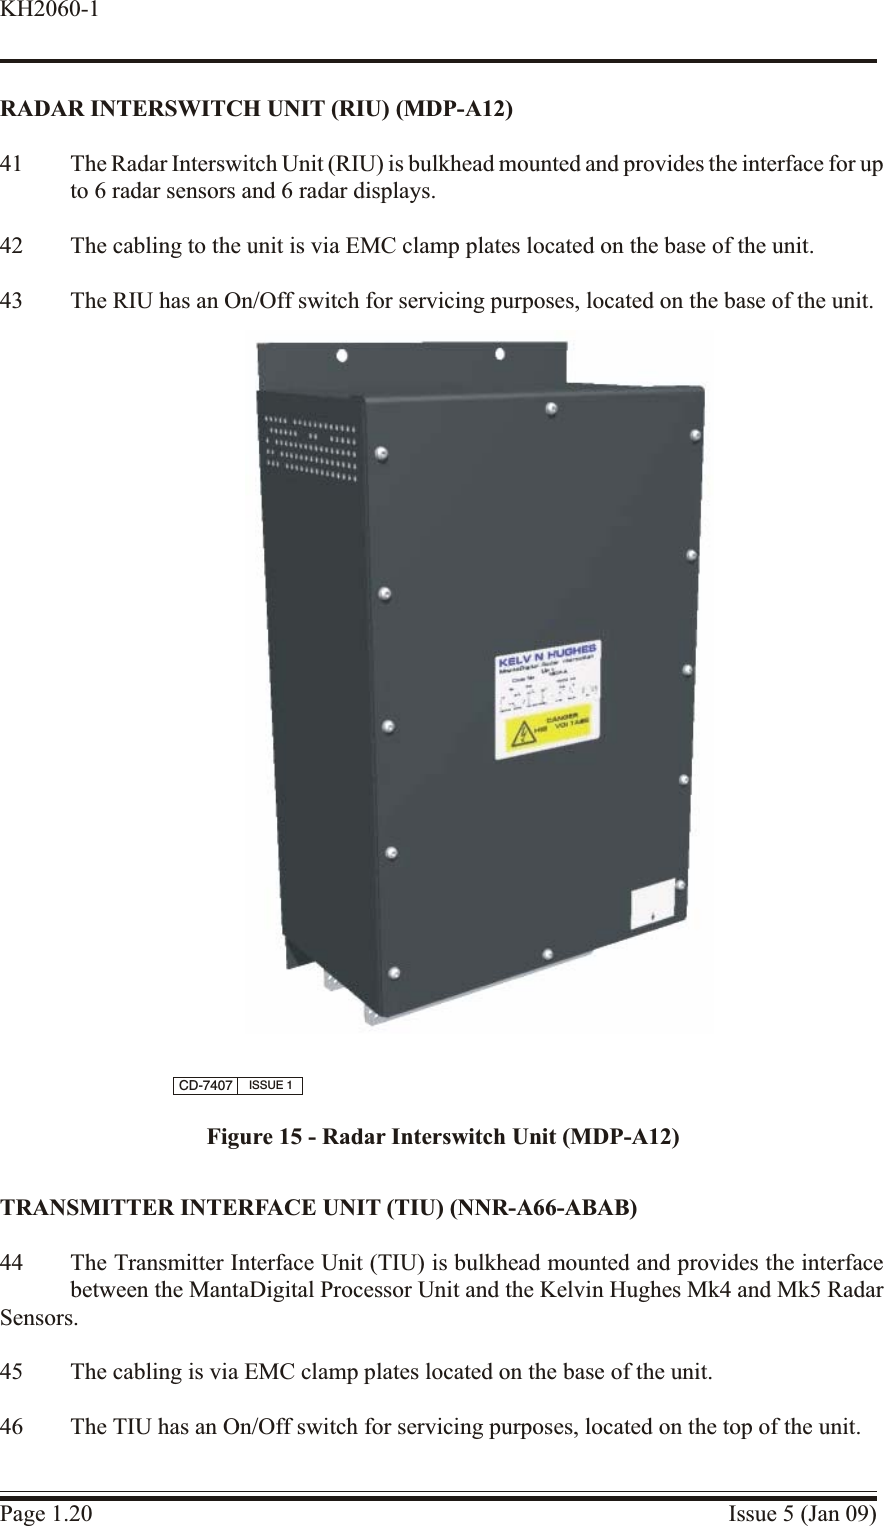 RADAR INTERSWITCH UNIT (RIU) (MDP-A12)41 The Radar Interswitch Unit (RIU) is bulkhead mounted and provides the interface for upto 6 radar sensors and 6 radar displays.42 The cabling to the unit is via EMC clamp plates located on the base of the unit.43 The RIU has an On/Off switch for servicing purposes, located on the base of the unit.TRANS MIT TER  IN TER FACE UNIT (TIU) (NNR-A66-ABAB)44 The Transmitter Interface Unit (TIU) is bulkhead mounted and provides the interfacebetween the MantaDigital Processor Unit and the Kelvin Hughes Mk4 and Mk5 RadarSensors.45 The cabling is via EMC clamp plates located on the base of the unit.46 The TIU has an On/Off switch for servicing purposes, located on the top of the unit.Page 1.20 Issue 5 (Jan 09)KH2060-1CD-7407 ISSUE 1Figure 15 - Radar Interswitch Unit (MDP-A12)